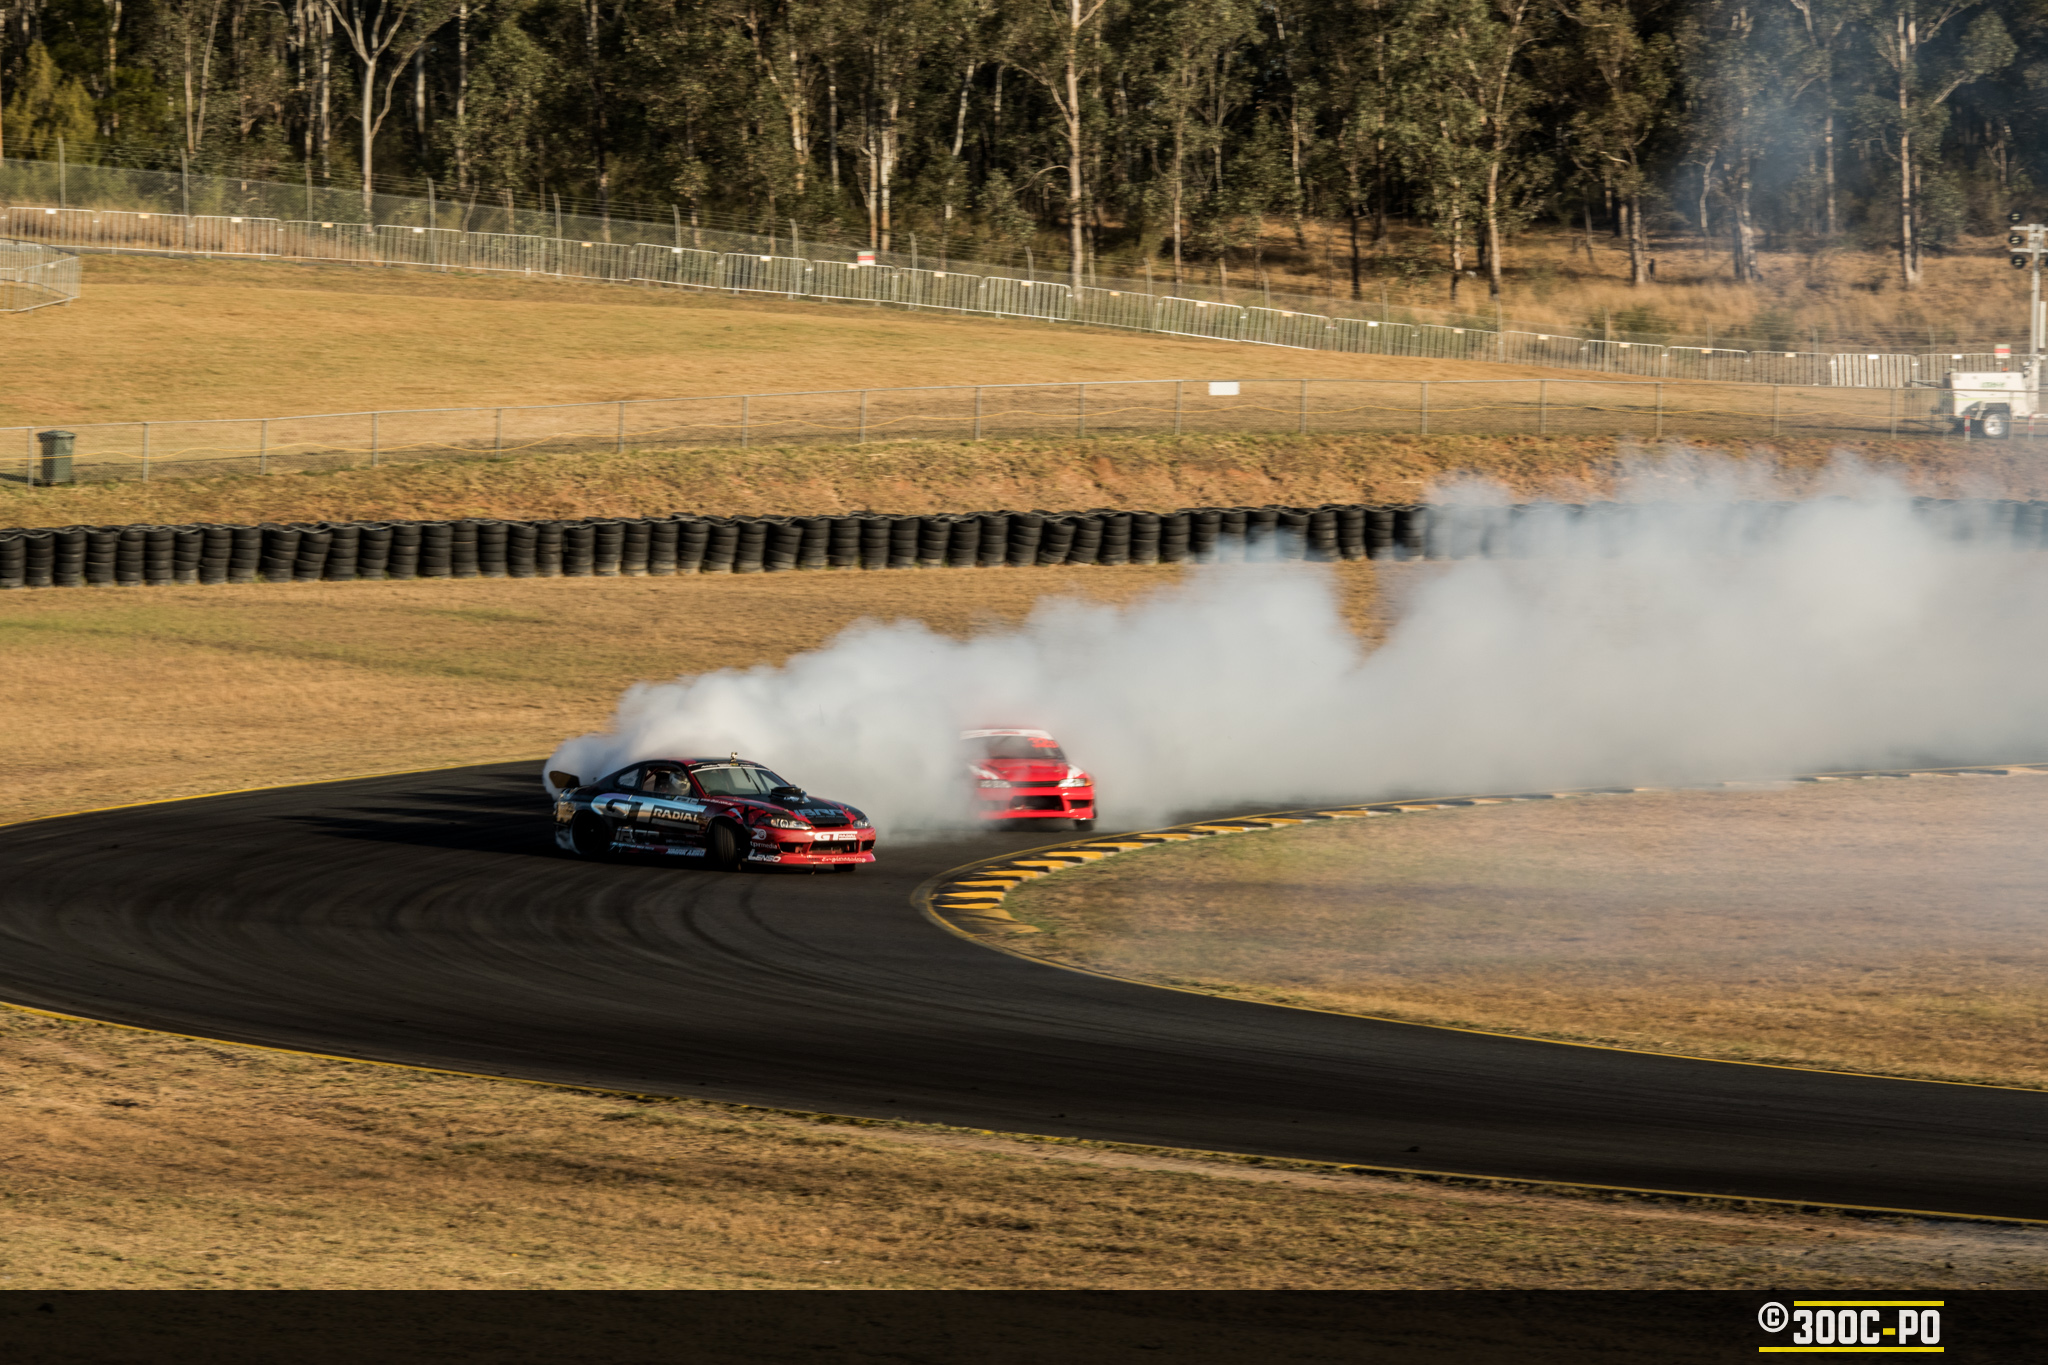 2017-10-12 - WTAC 2017 Test Day 099